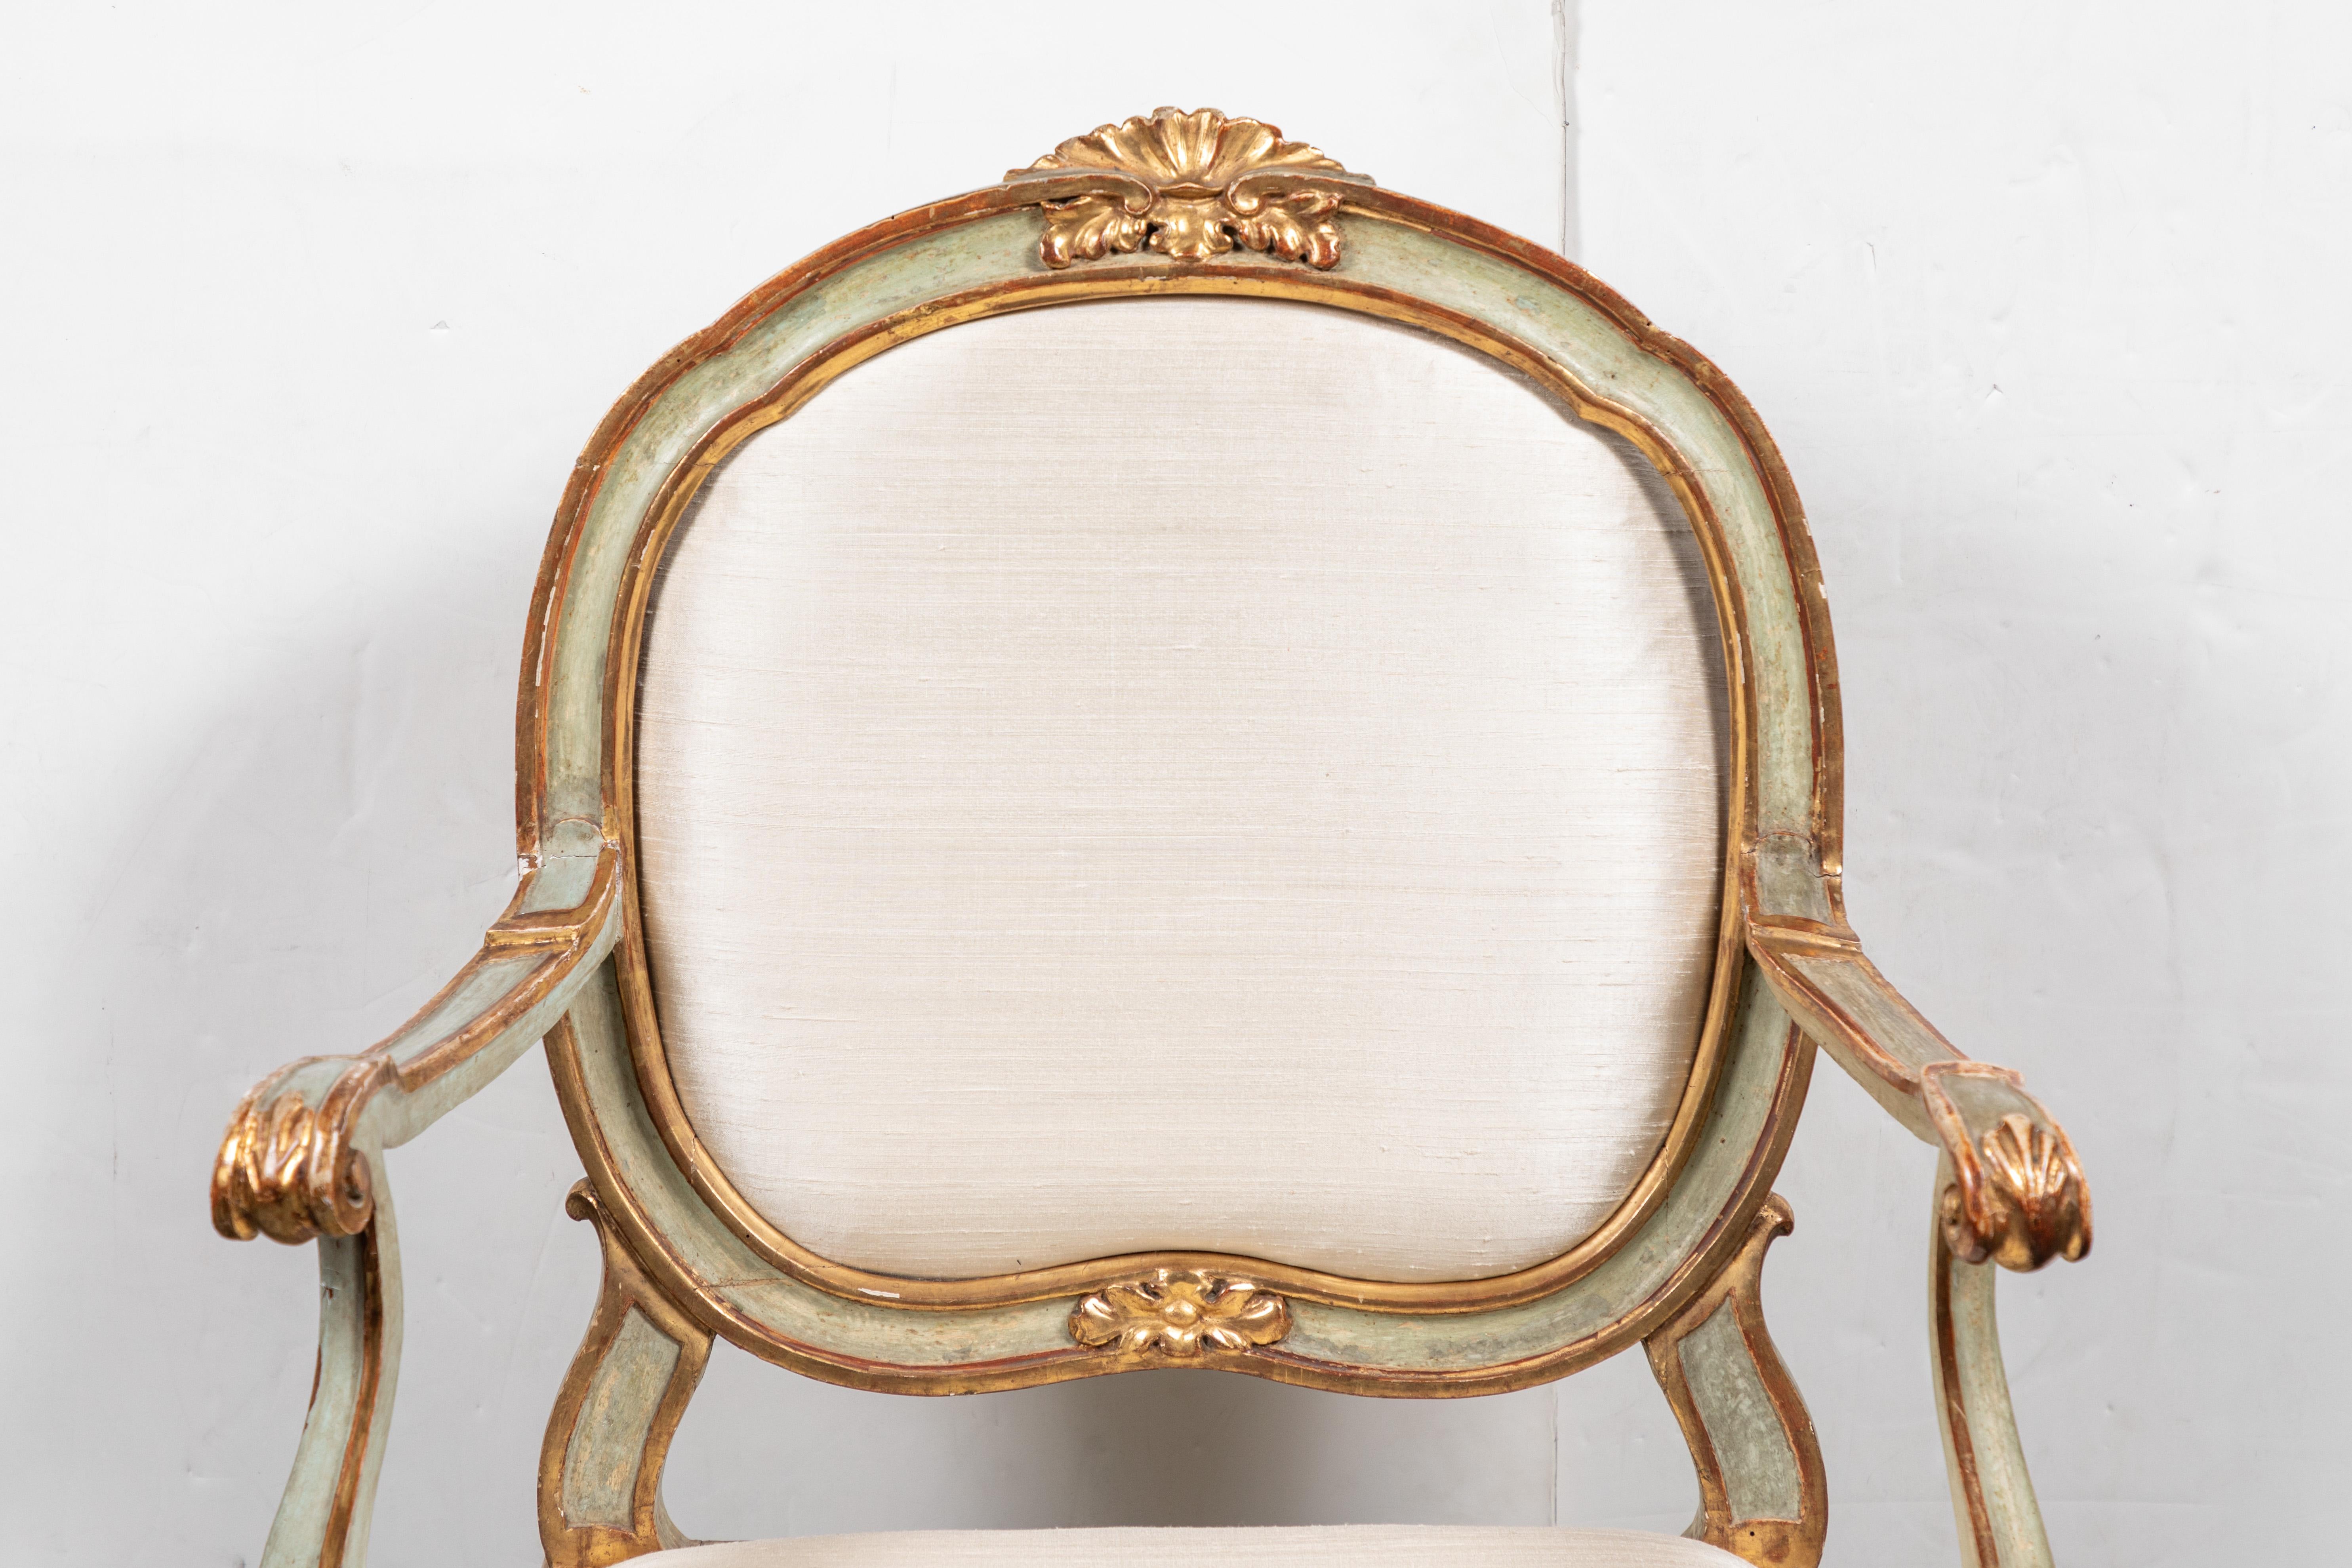 Hand carved, painted, gessoed and 22-karat gold gilded, Venetian armchair. The whole on cabriole legs, and featuring foliate, and shell-form relief carvings throughout. Upholstered in a contemporary, creme, silk.